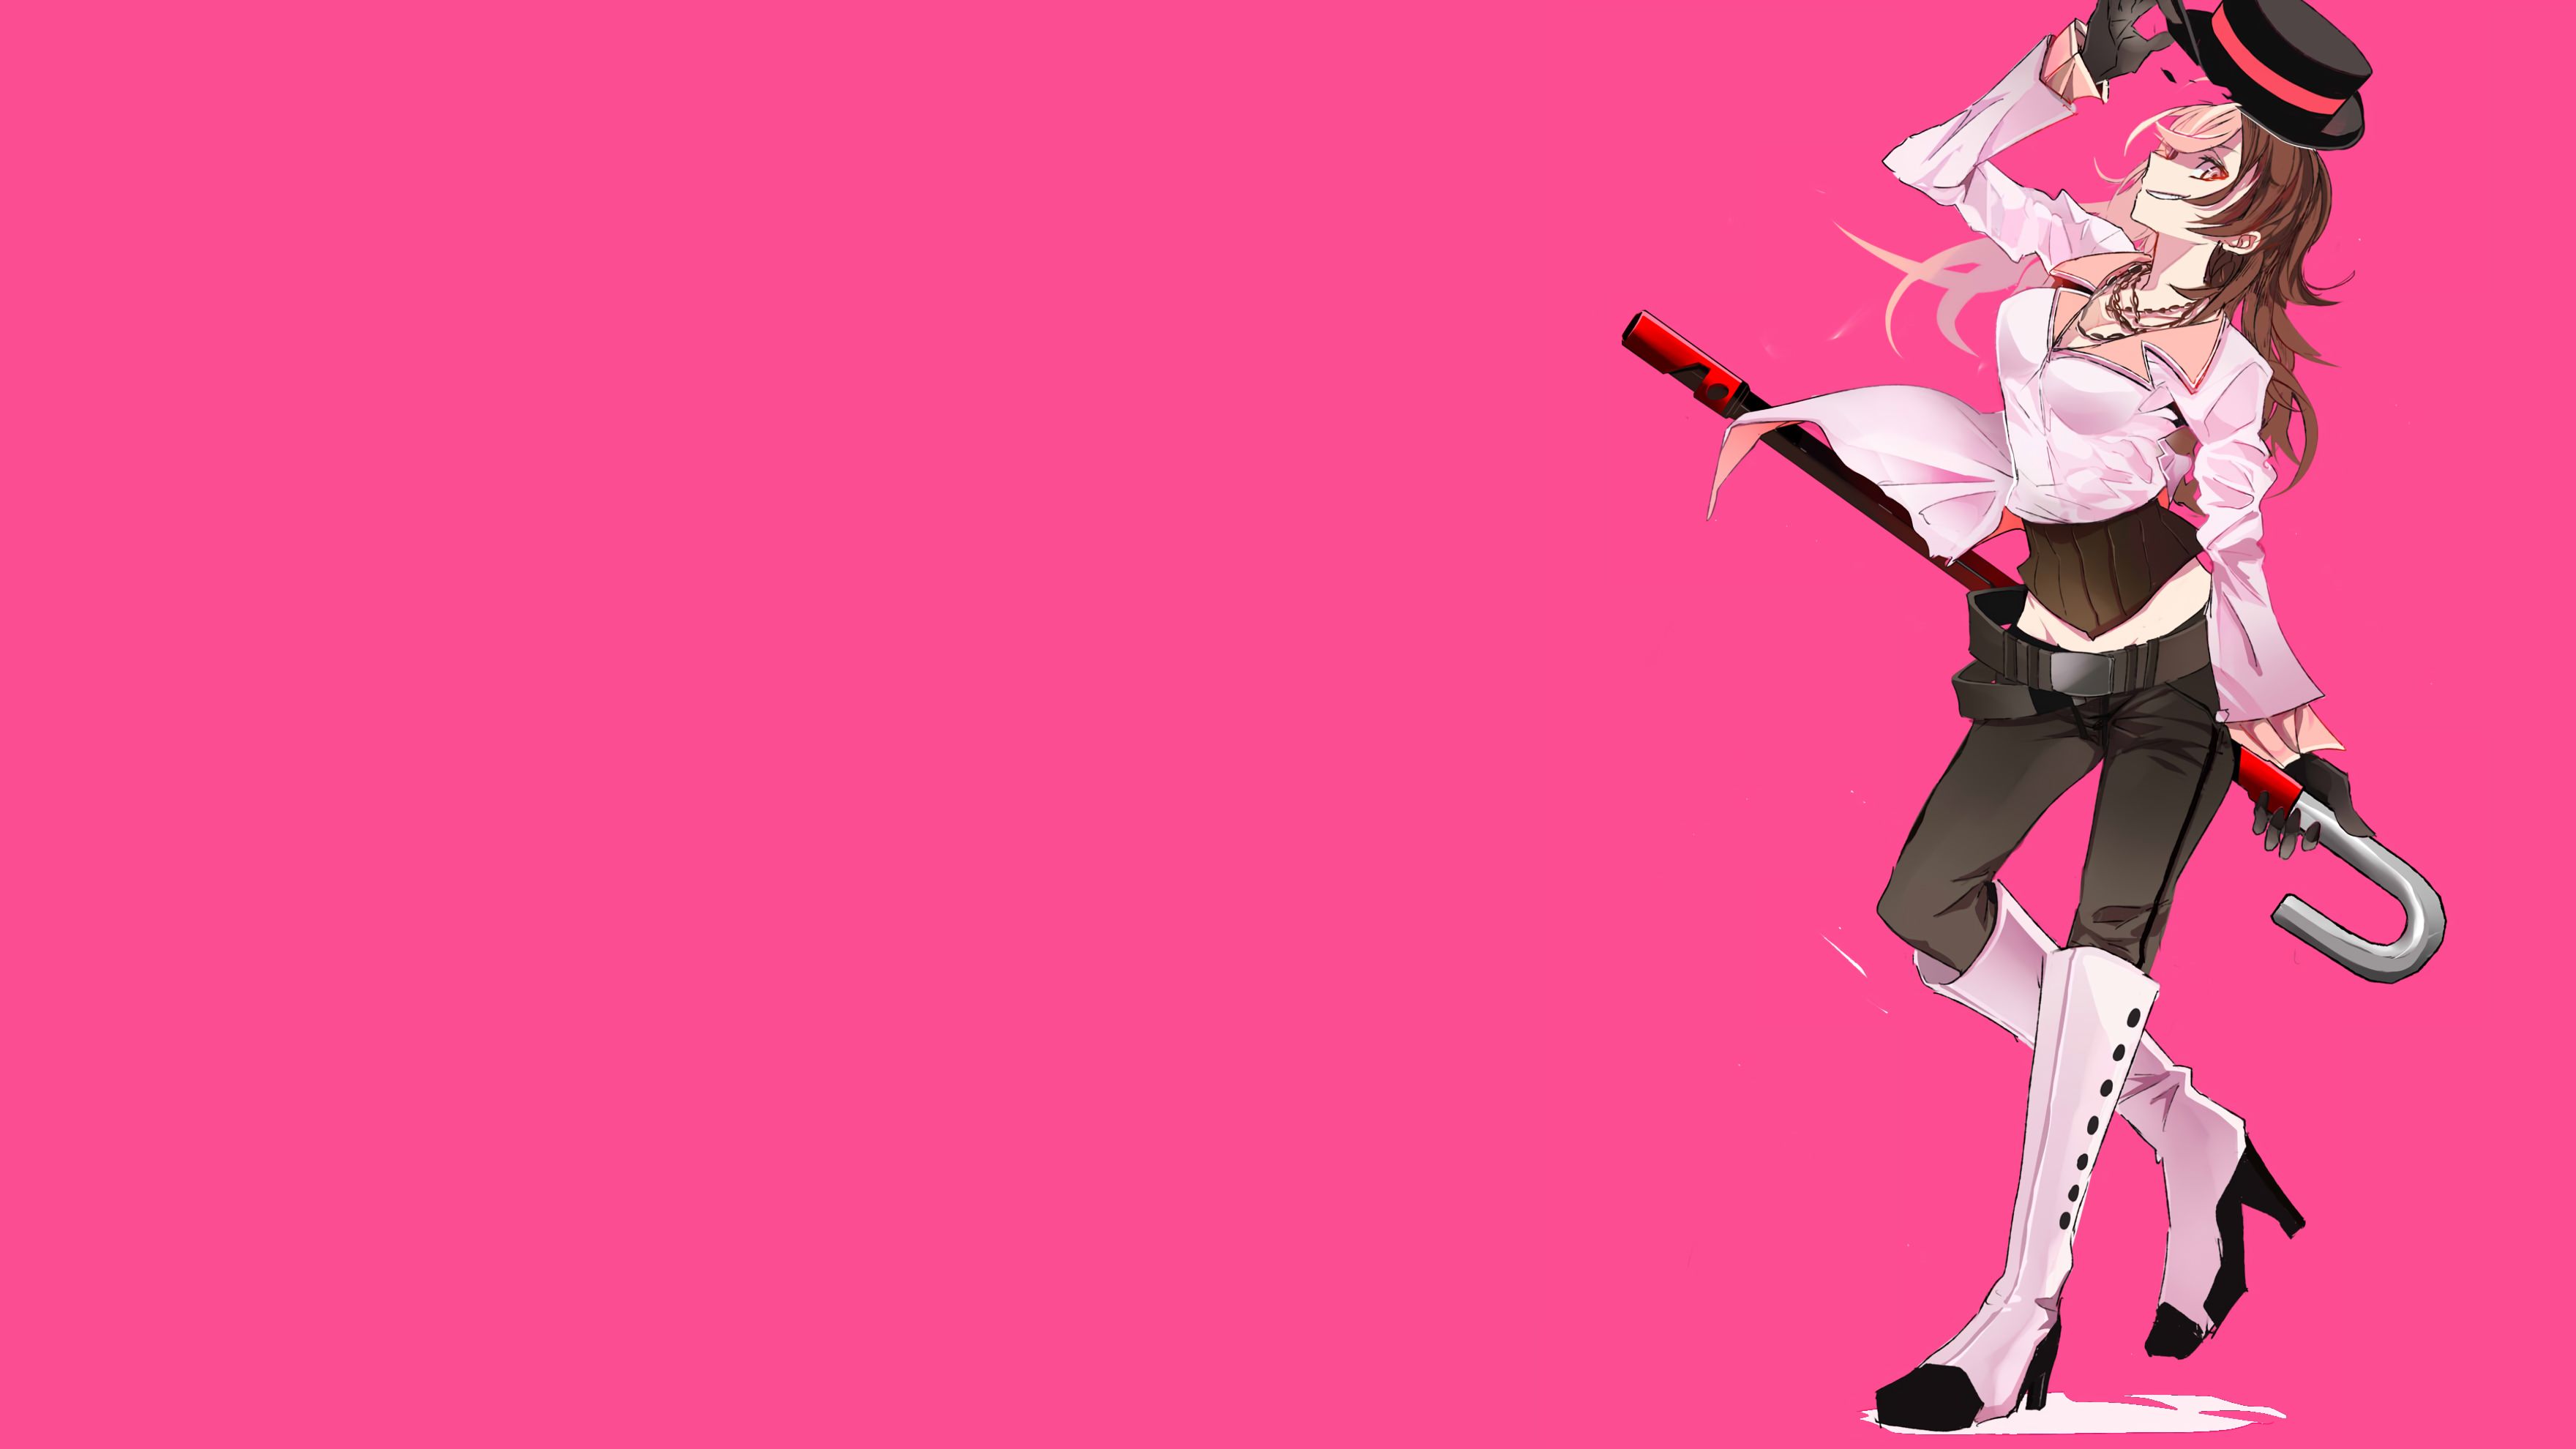 Wallpapers: Neo.